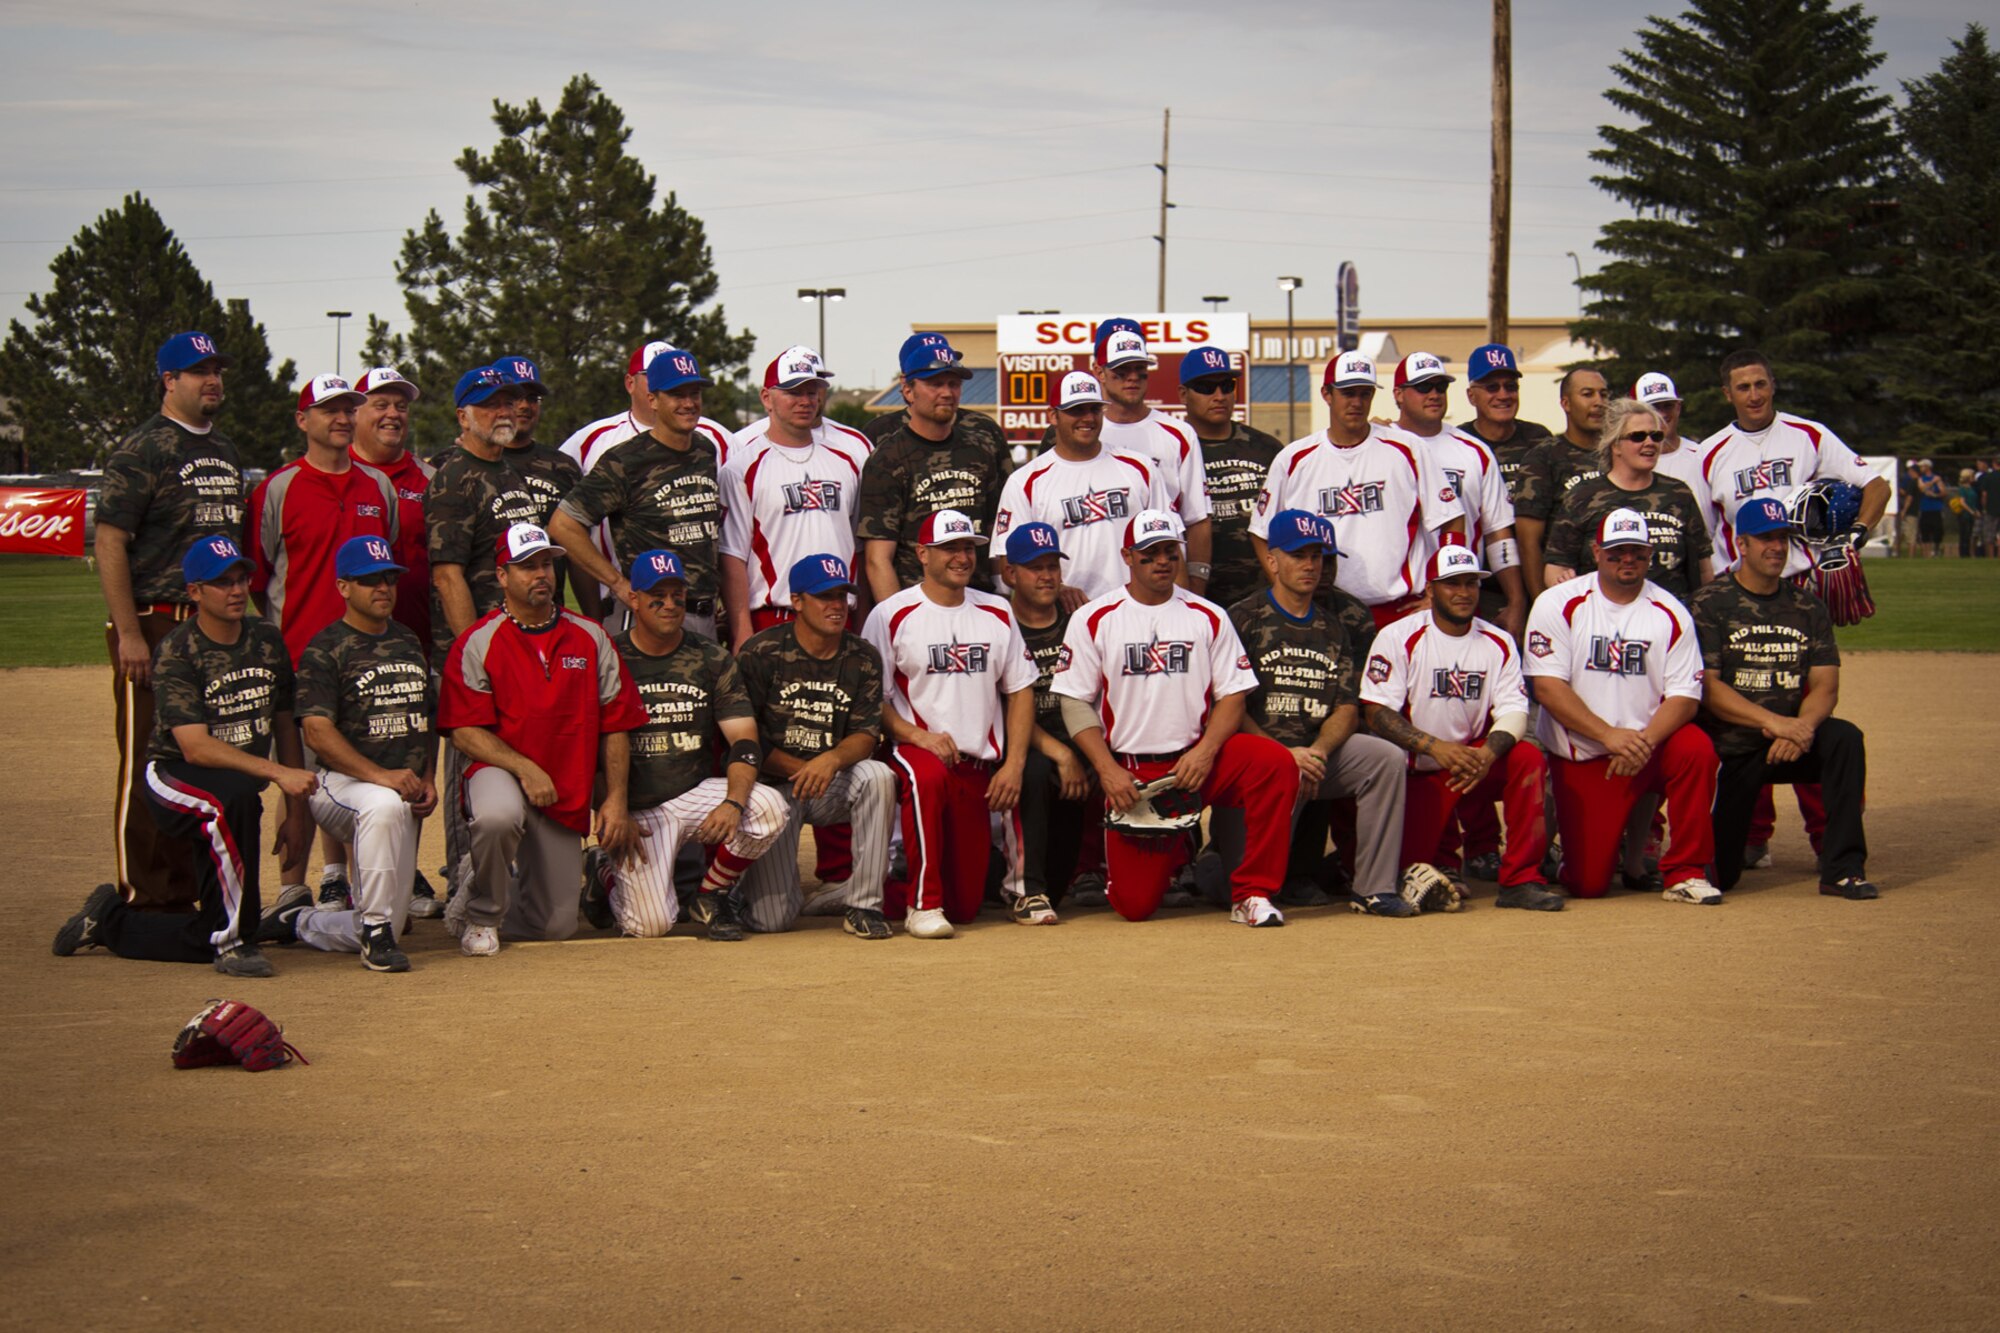 Bismarck, N.D. -- The first ever McQuade's North Dakota Military All Stars Softball Team played Team USA Features on June 22 in the first exhibition game of the Sam McQuade Softball Tournament. Staff Sgt. Louis Kane, 705th Munitions Squadron, represents Team Minot. The Sam McQuade Sr./Budweiser Charity Softball Tournament is the US' largest non-profit, one weekend slowpitch softball tournament that brings together players, families and fans from all over the country. (Courtesy photo)